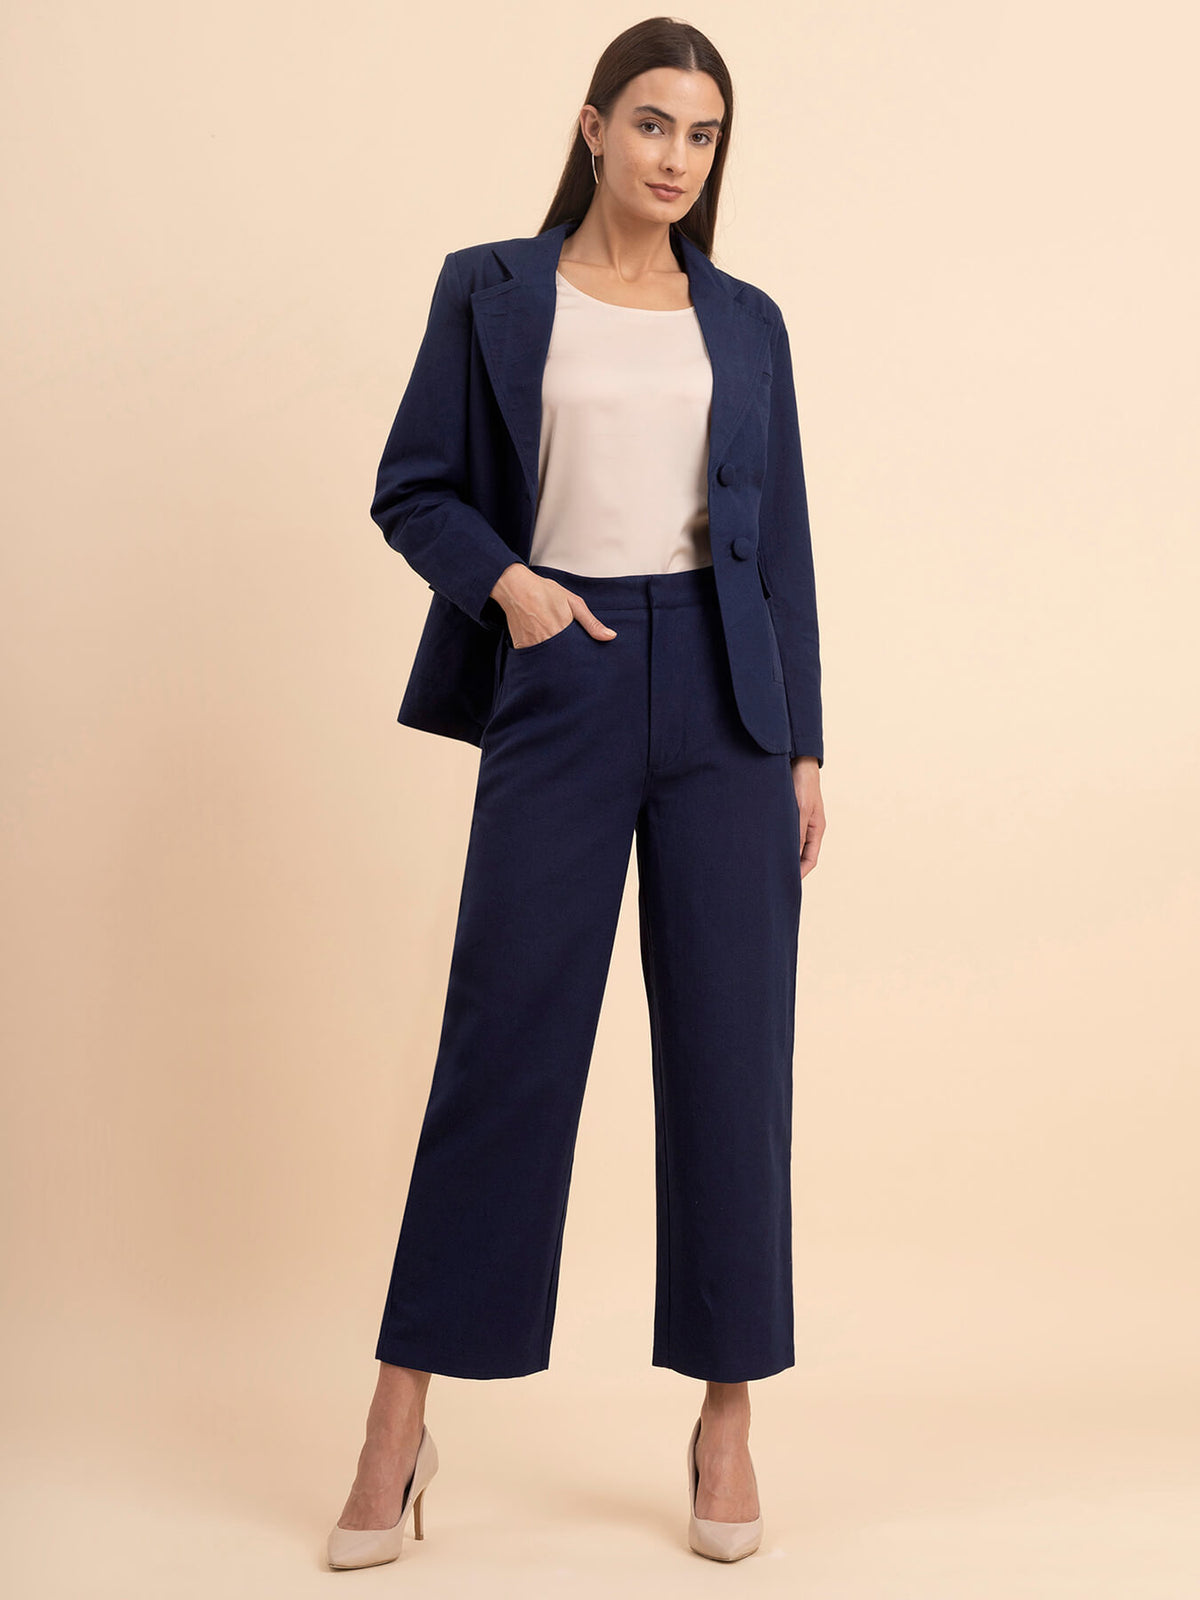 Linen Blazer and Trousers Co-ord - Navy Blue